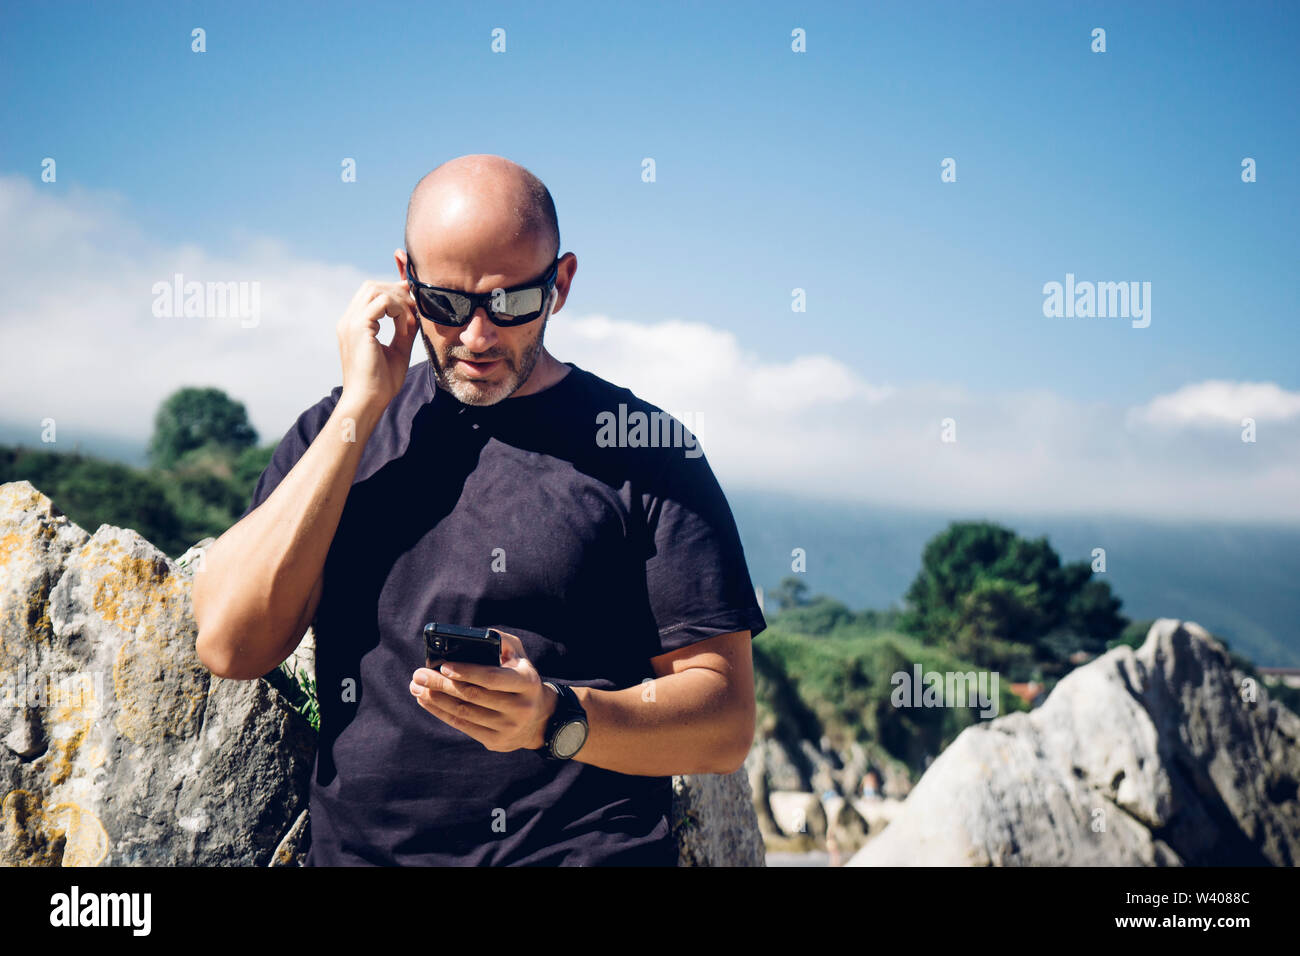 Bald man using wireless headset and mobile phone. Stock Photo